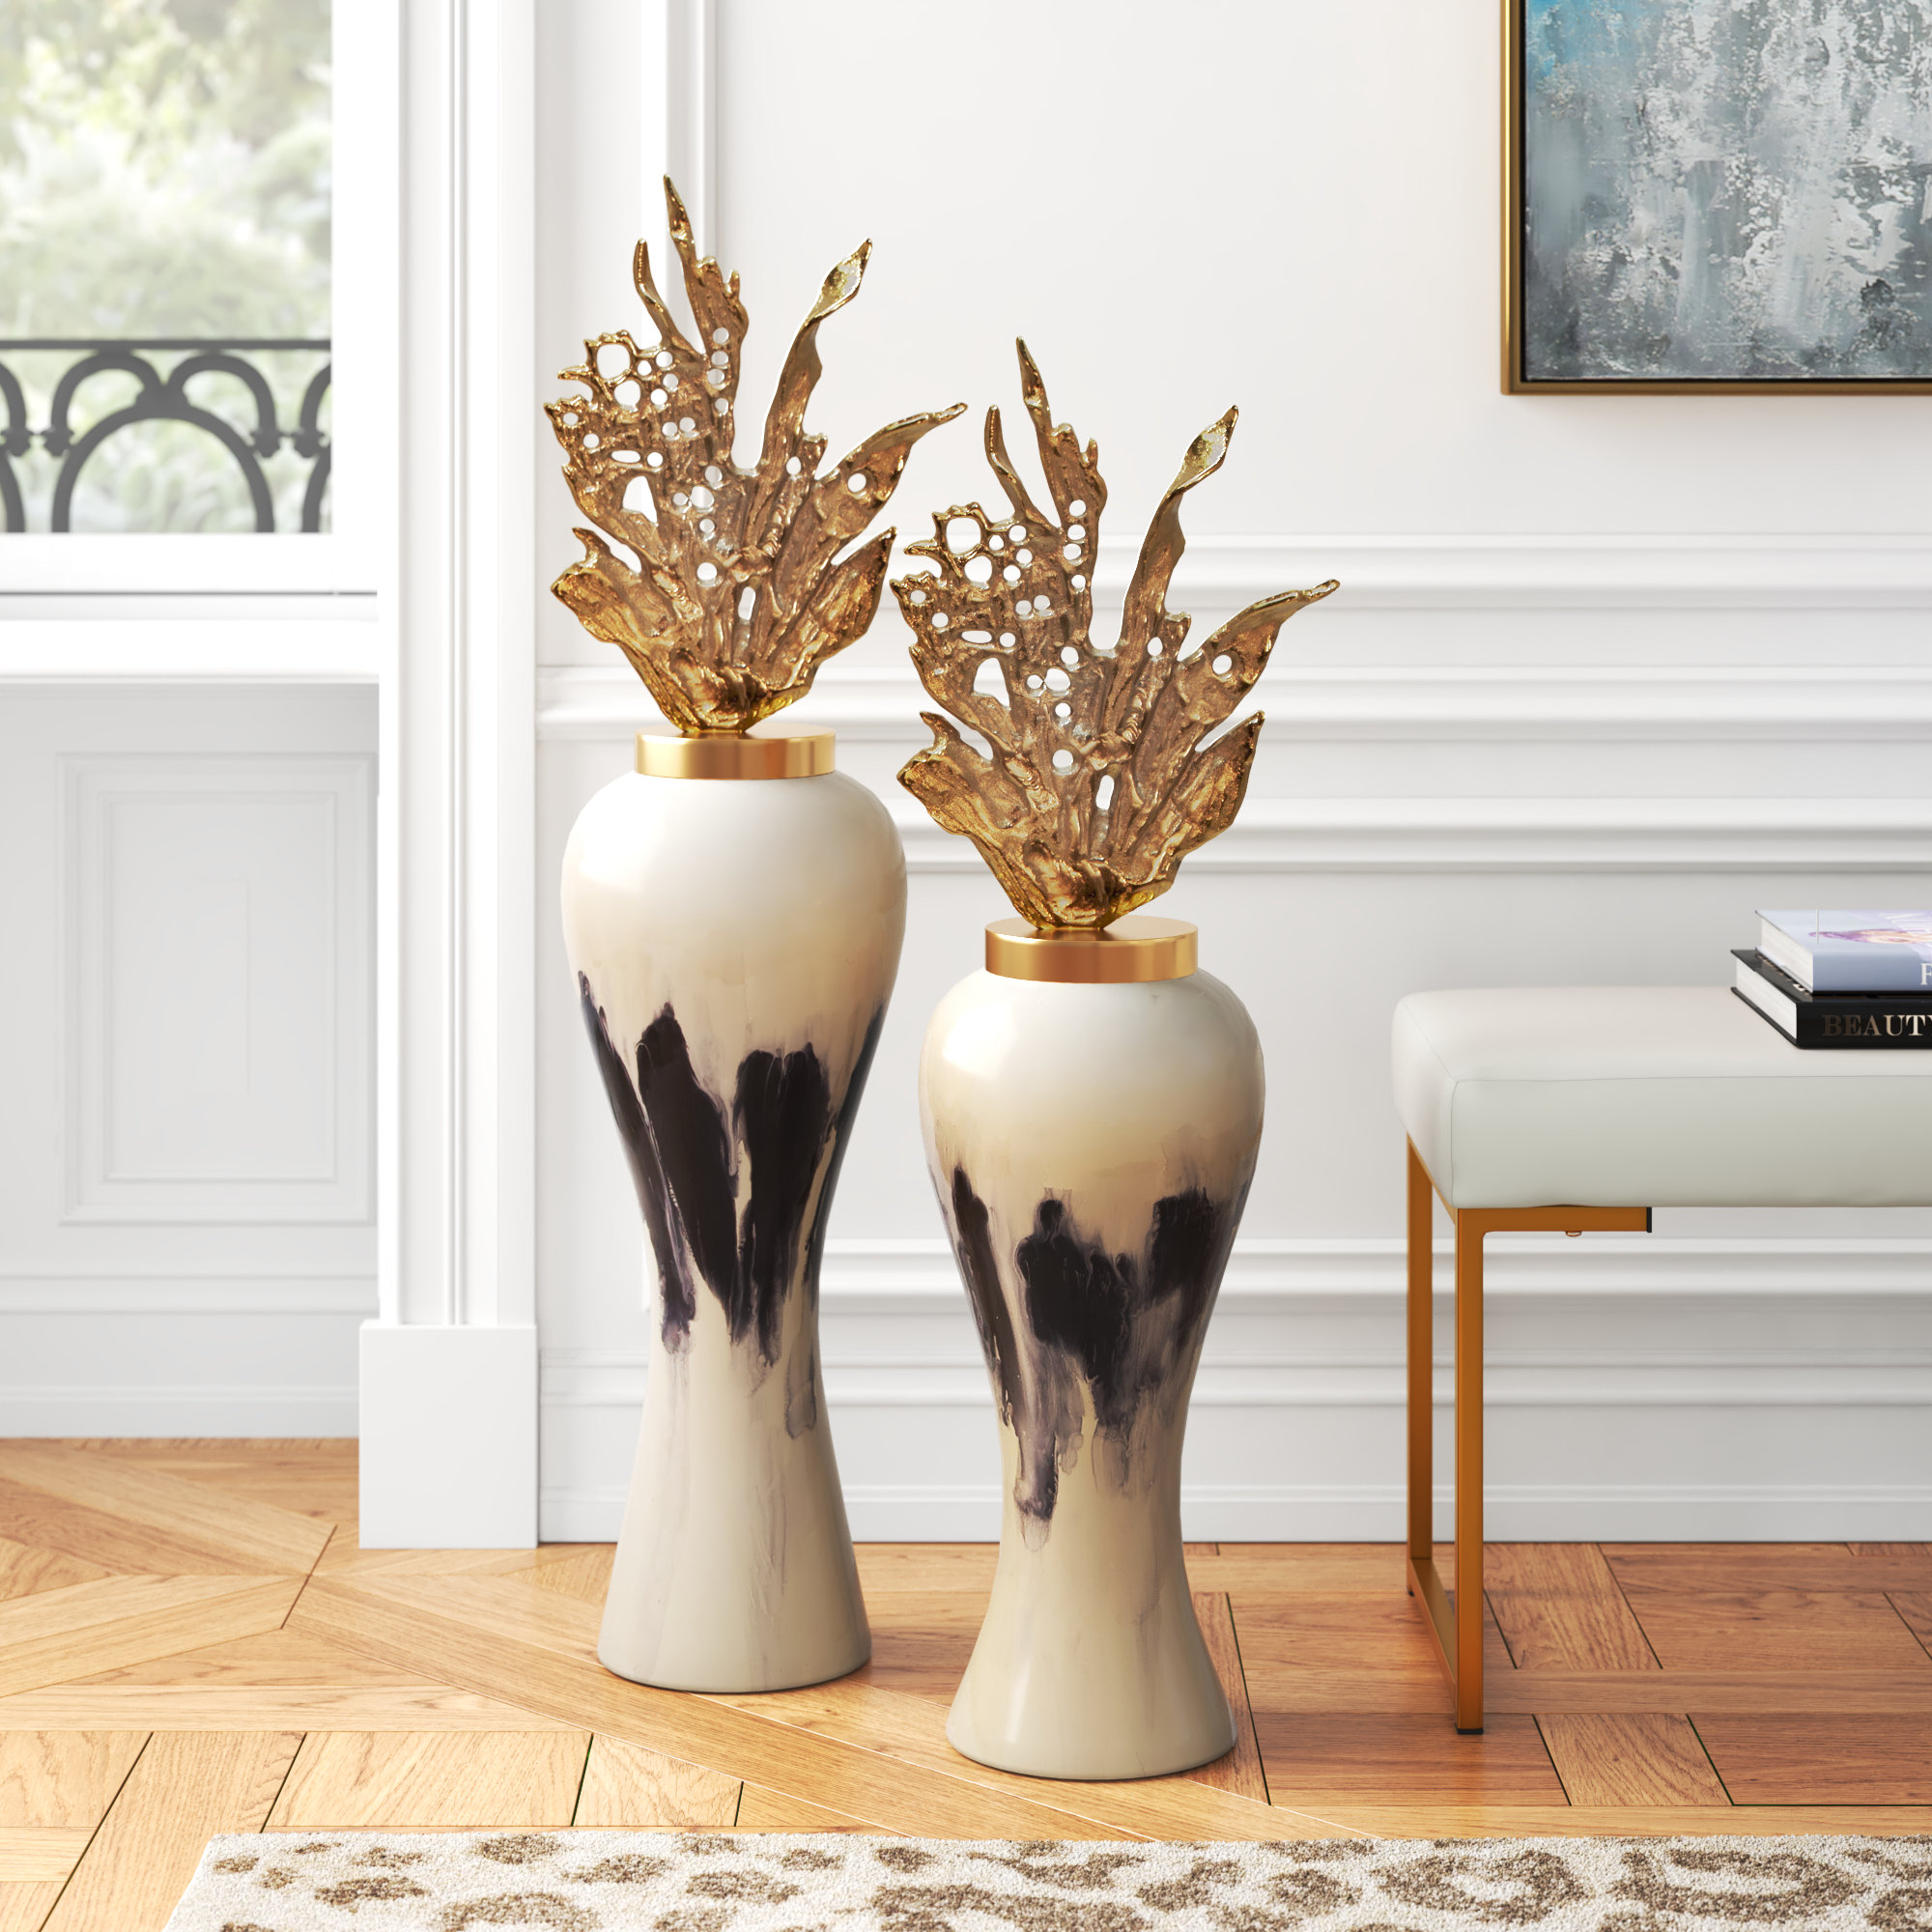 Etta Avenue™ Metal Vase - Contemporary Glam Aluminum And Glass Vase With  Creative Leaf Lid In White, Black And Gold - Decorative Table Decor &  Reviews | Wayfair